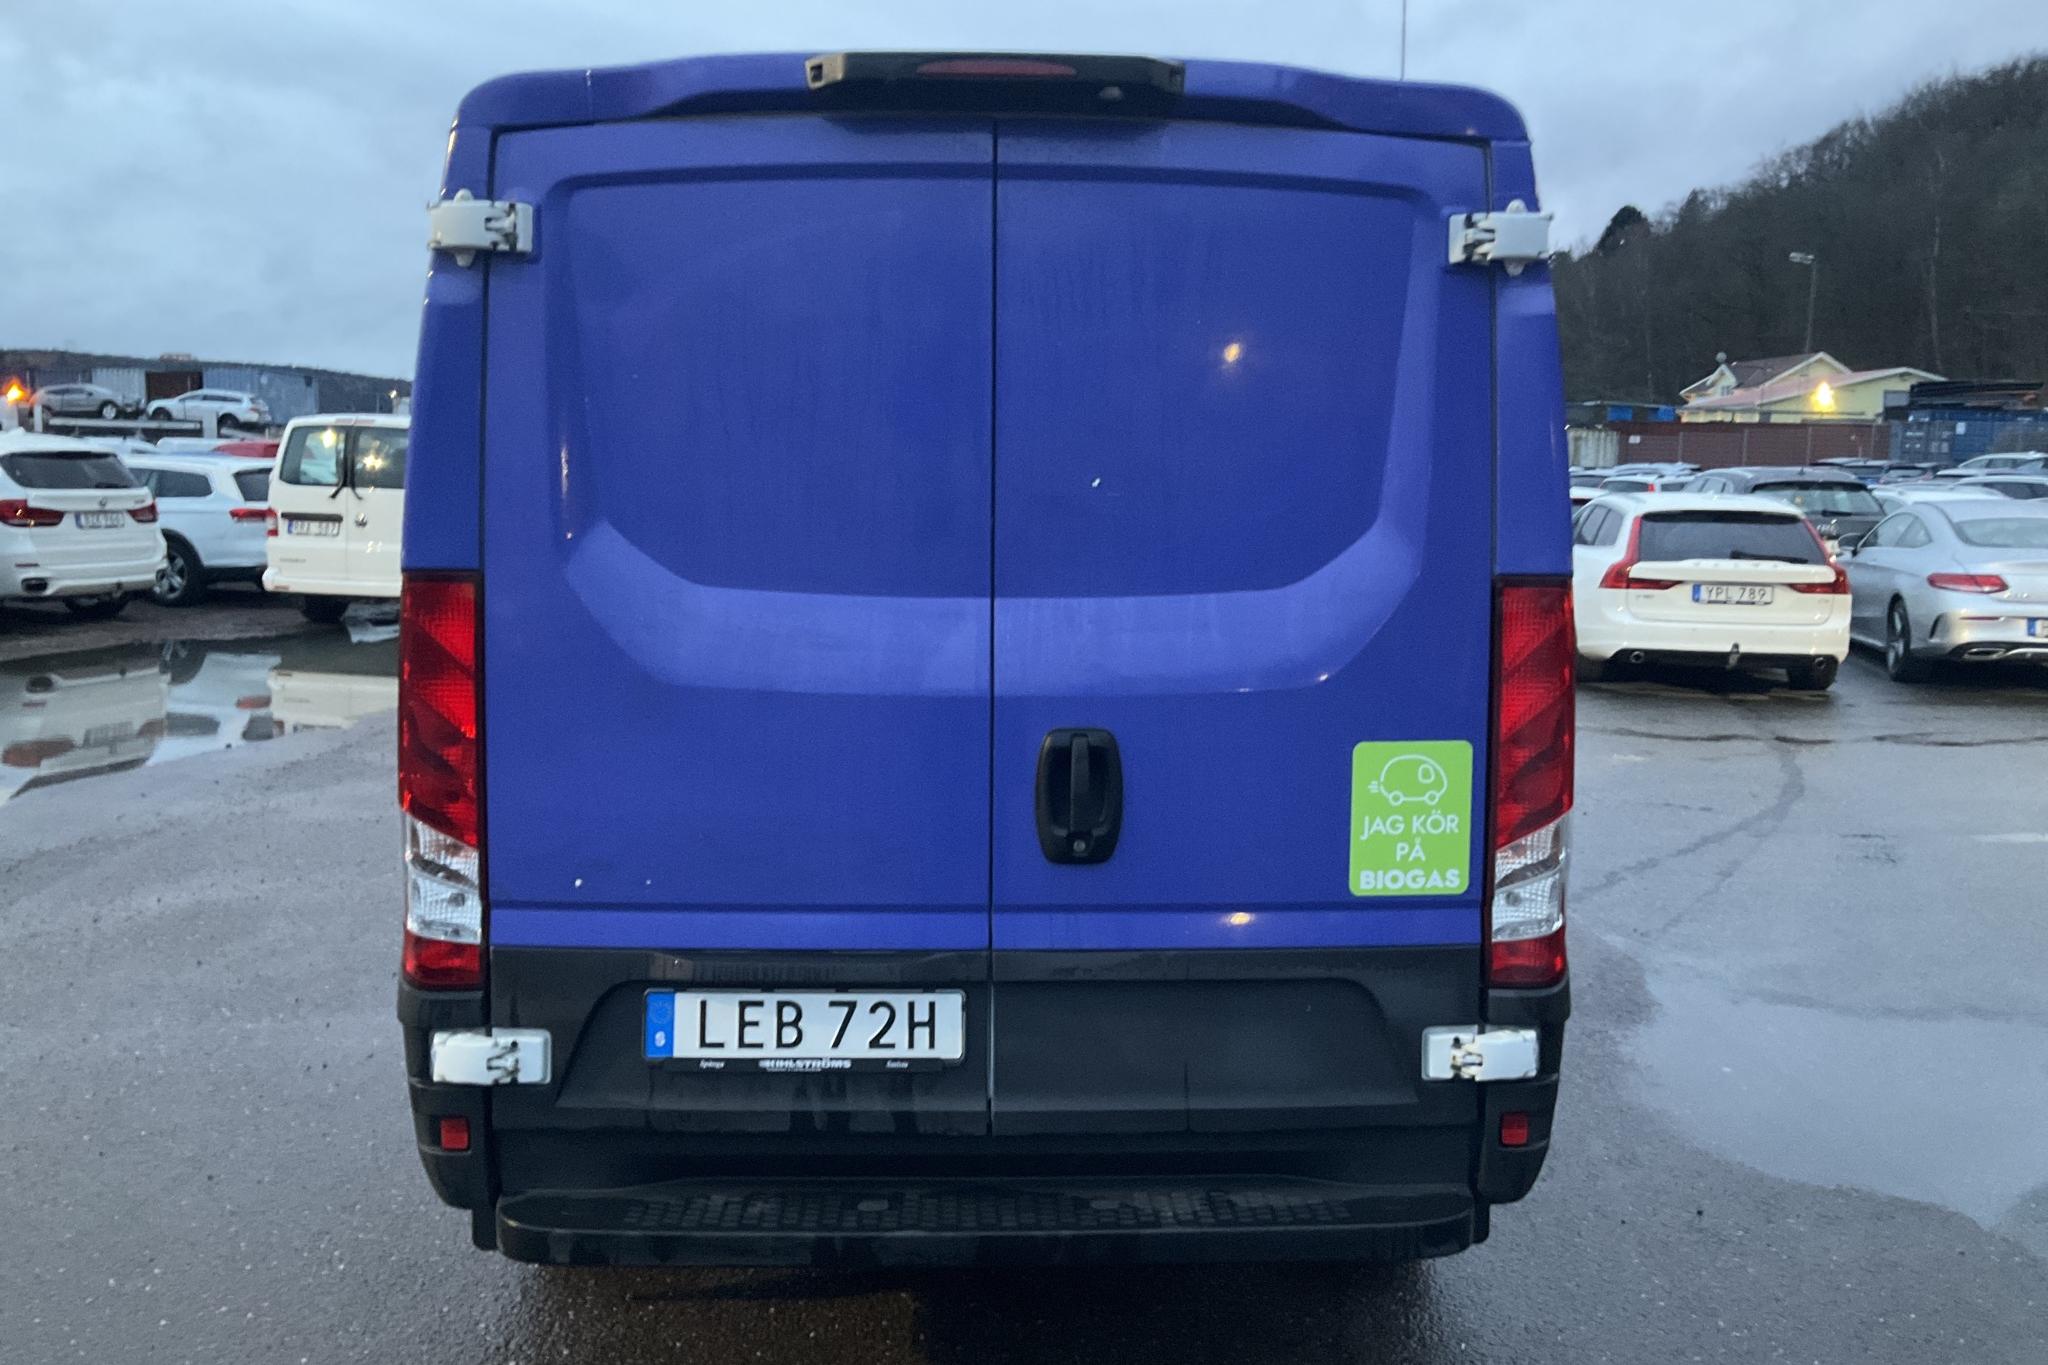 Iveco Daily 35 3.0 CNG (136hk) - 3 403 mil - Automat - vit - 2021